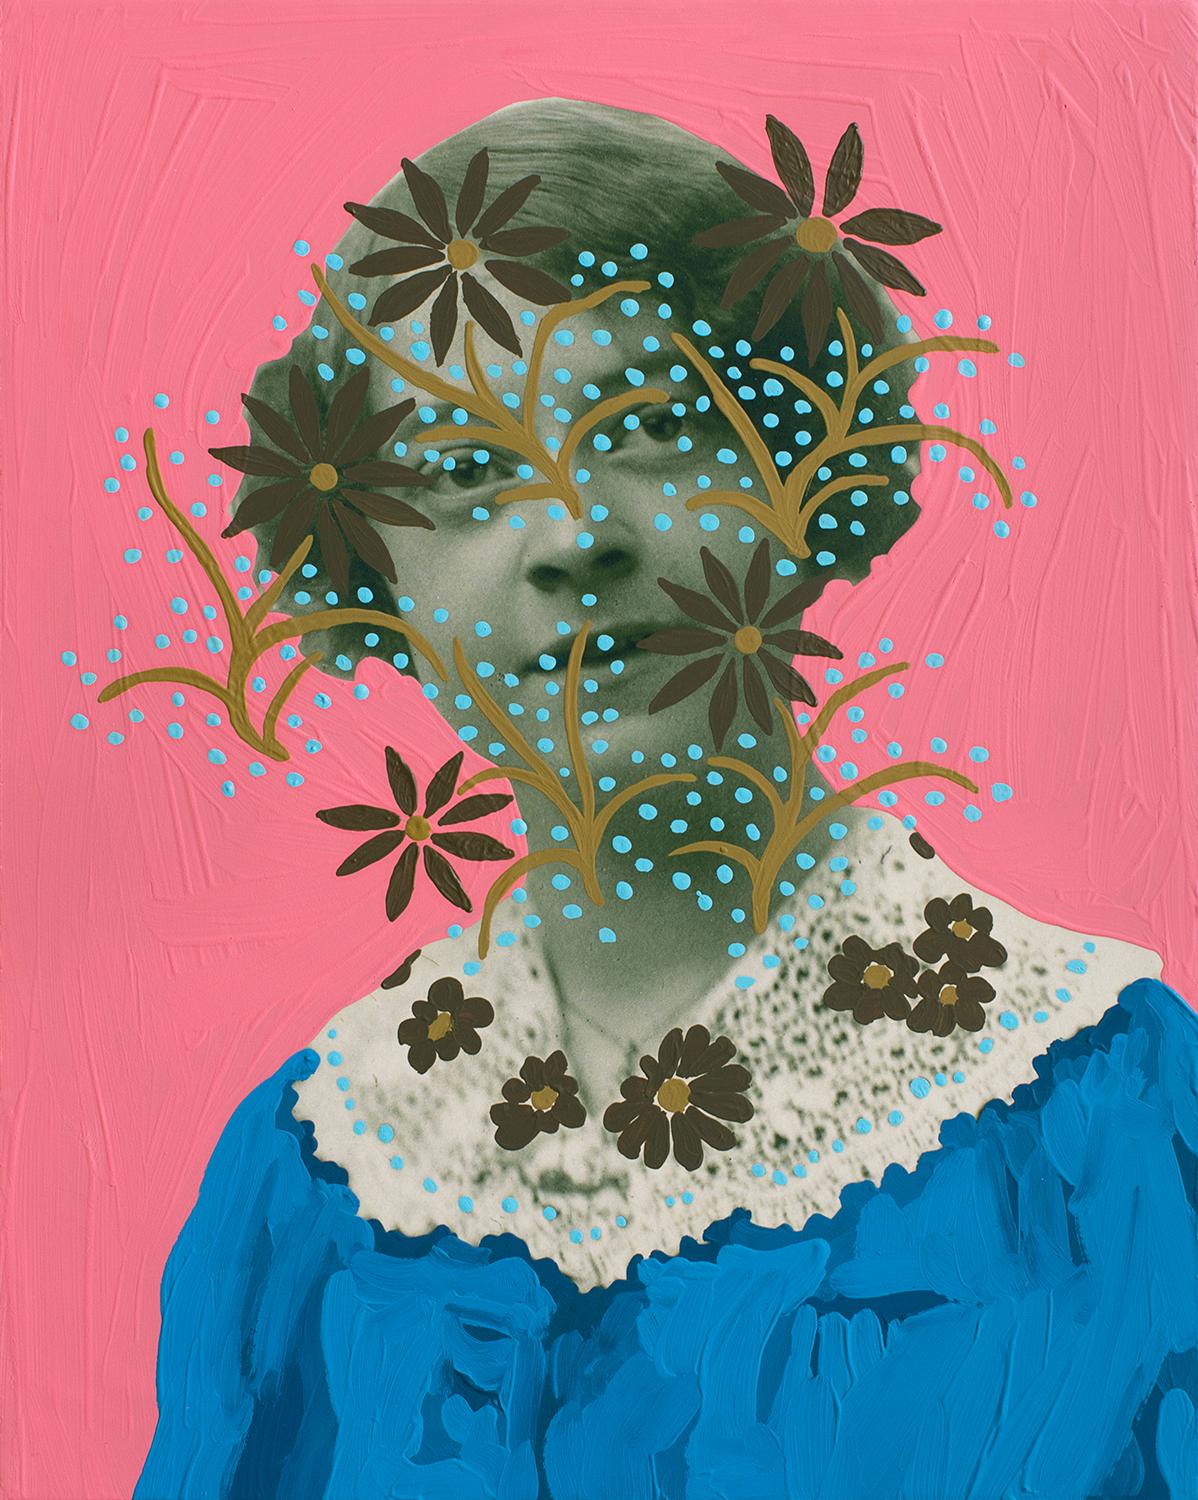 Untitled (Woman with Lace and Flowers) - Print by Daisy Patton